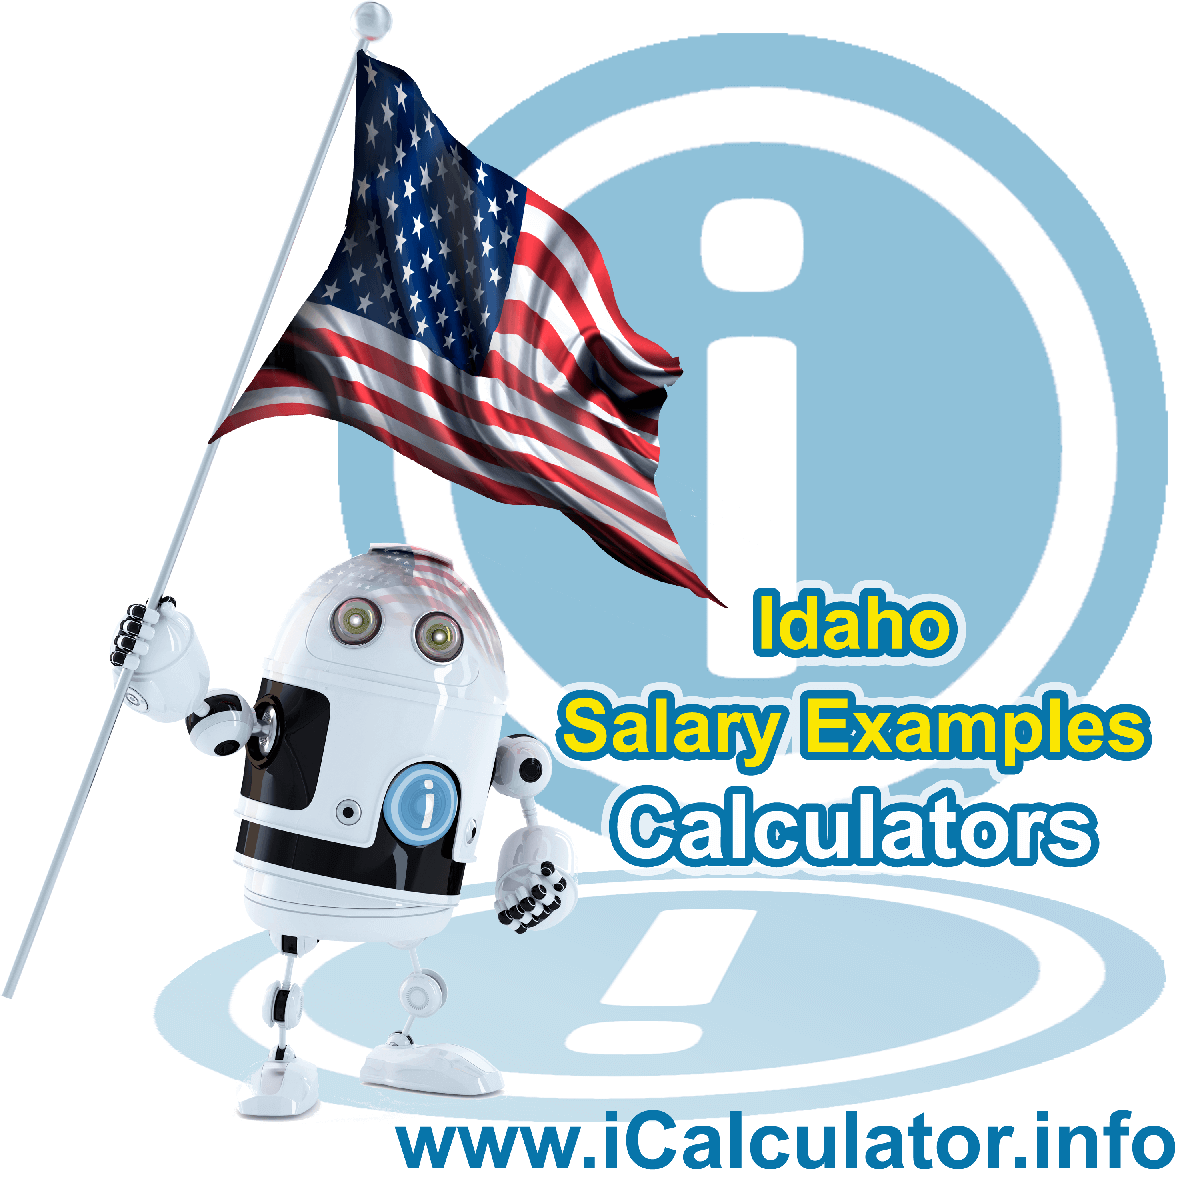 Idaho Salary Example for $80,000.00 in 2022 | iCalculator™ | $80,000.00 salary example for employee and employer paying Idaho State tincome taxes. Detailed salary after tax calculation including Idaho State Tax, Federal State Tax, Medicare Deductions, Social Security, Capital Gains and other income tax and salary deductions complete with supporting Idaho state tax tables 